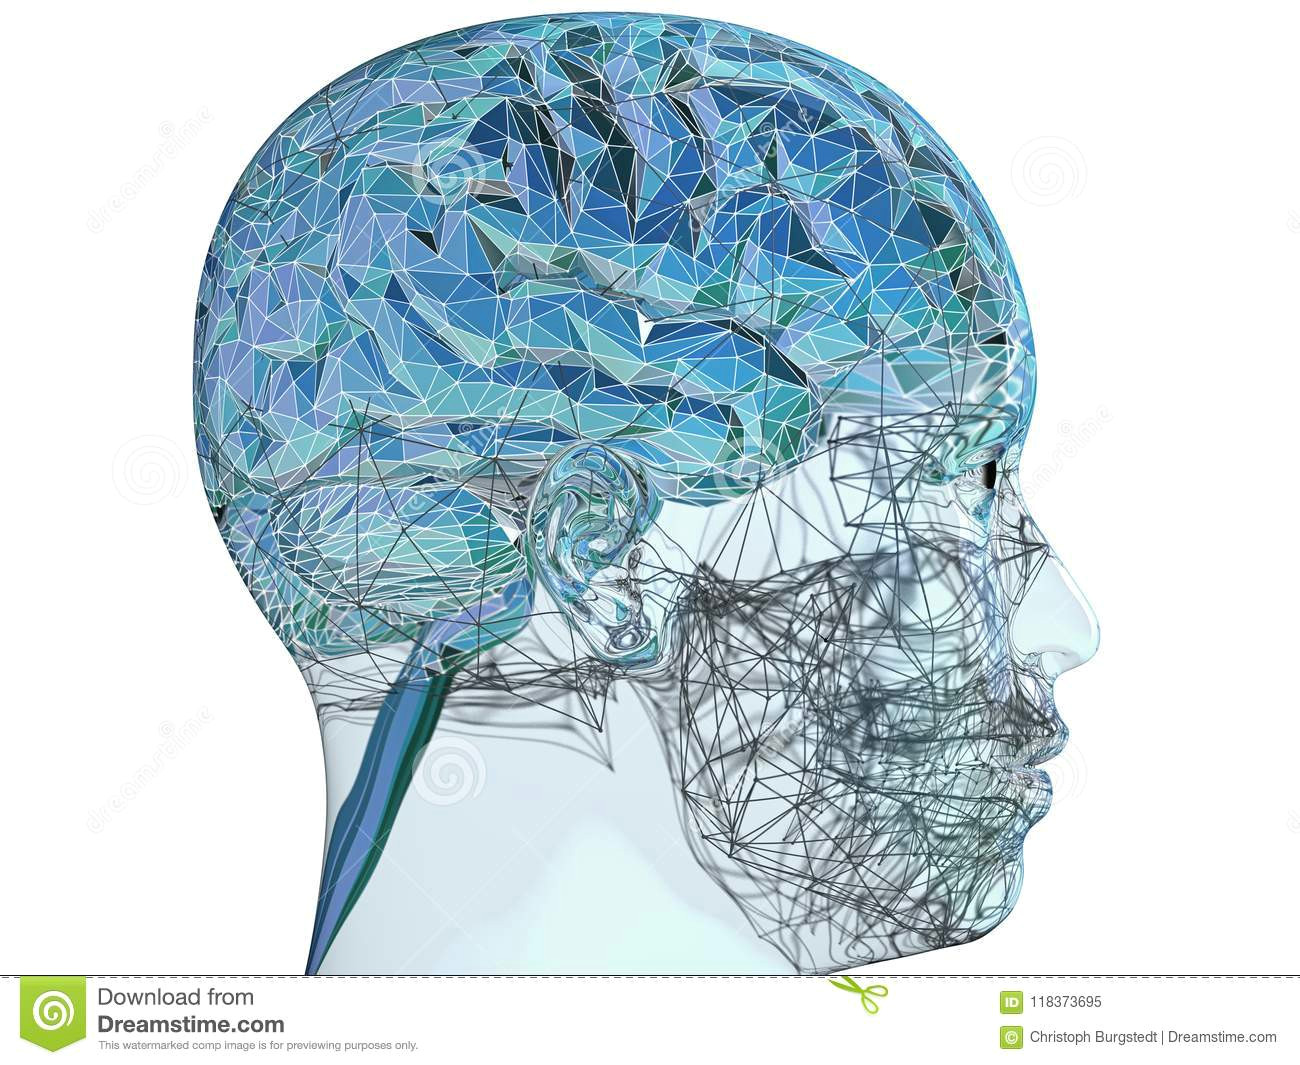 3d illustration of a transparent human refractive skull with colorful polygon styled brain